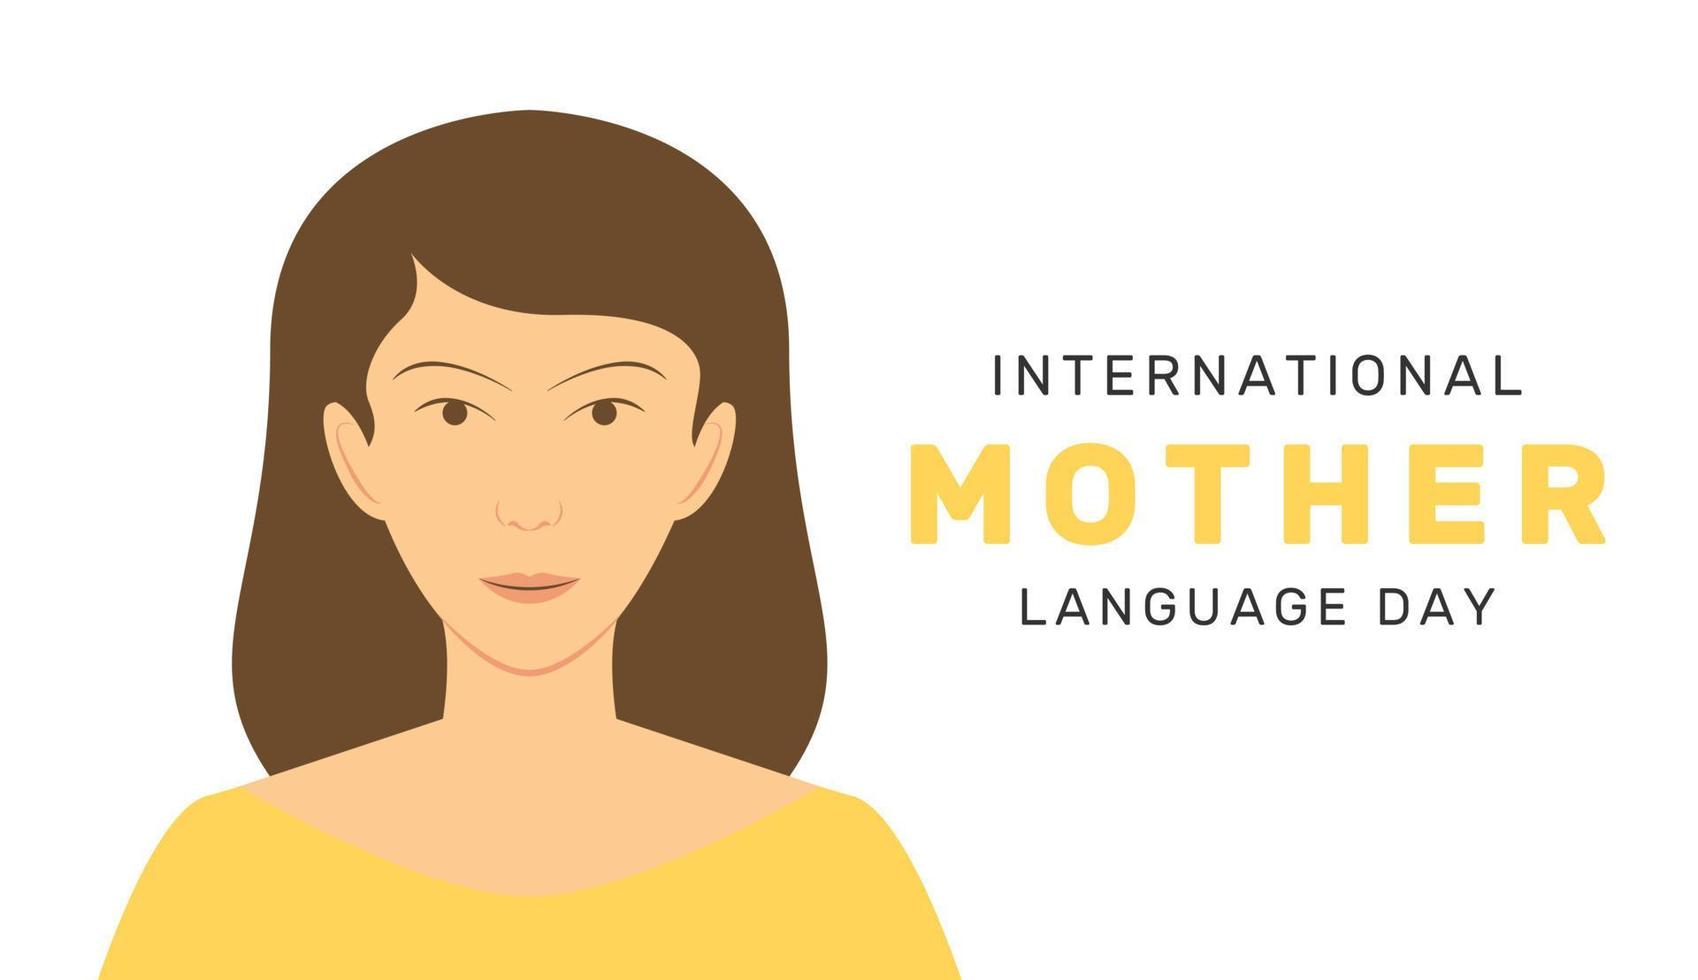 Vector illustration of International Mother Language Day with woman face cartoon character